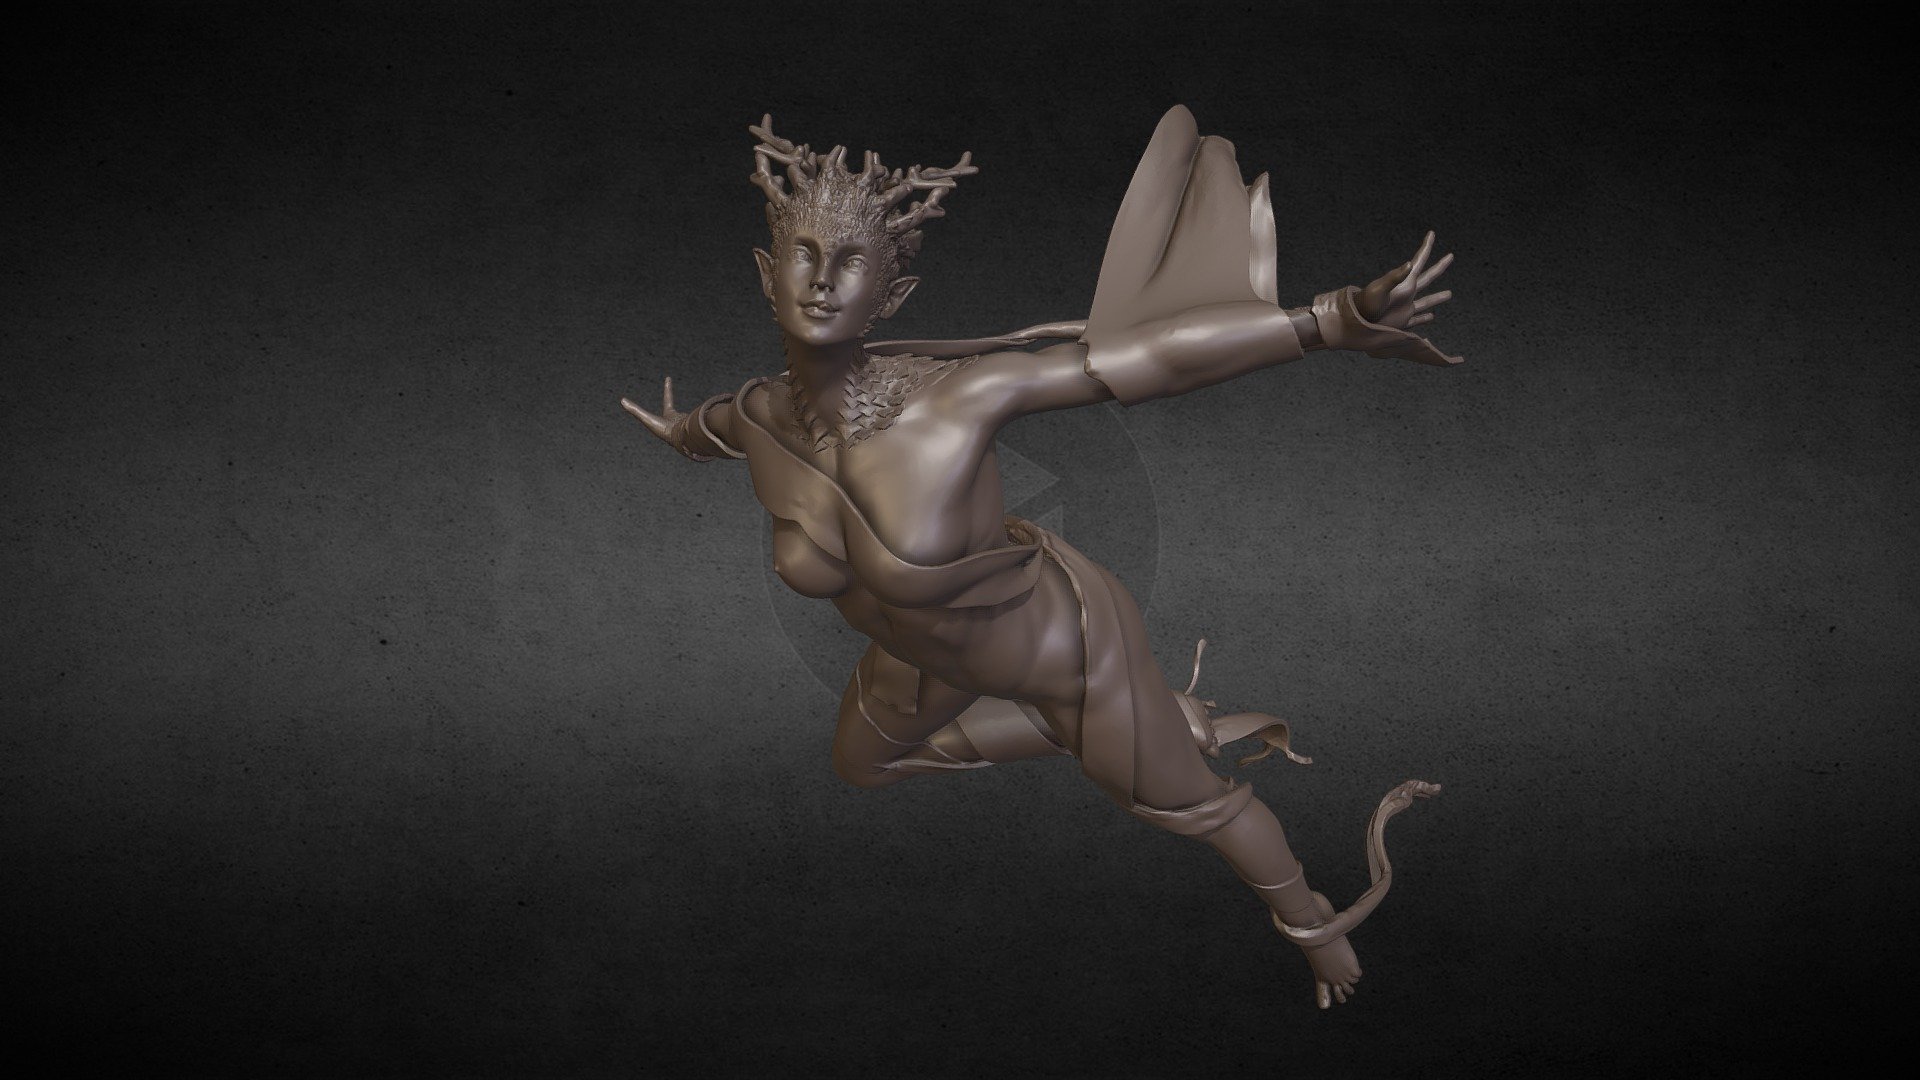 The representative of nymphs, a variety of dishonesty (daemons) that lives in forests, ponds and meadows. All nymphs are tightly connected with the surrounding ecosystem and, as part of it, lead a predominantly sedentary lifestyle. In most cases, they are benevolent or neutral towards representatives of other races (except for dryads - forest nymphs who can be aggressive).

Low detail figure you can get in  https://www.thingiverse.com/thing:3750291

Bust version you can get for free in https://skfb.ly/6THVU

My patreon https://www.patreon.com/ill_drakon

My instagram https://www.instagram.com/drakon_ill - When the nymphs learn to fly. 3D printable - 3D model by ill_drakon 3d model